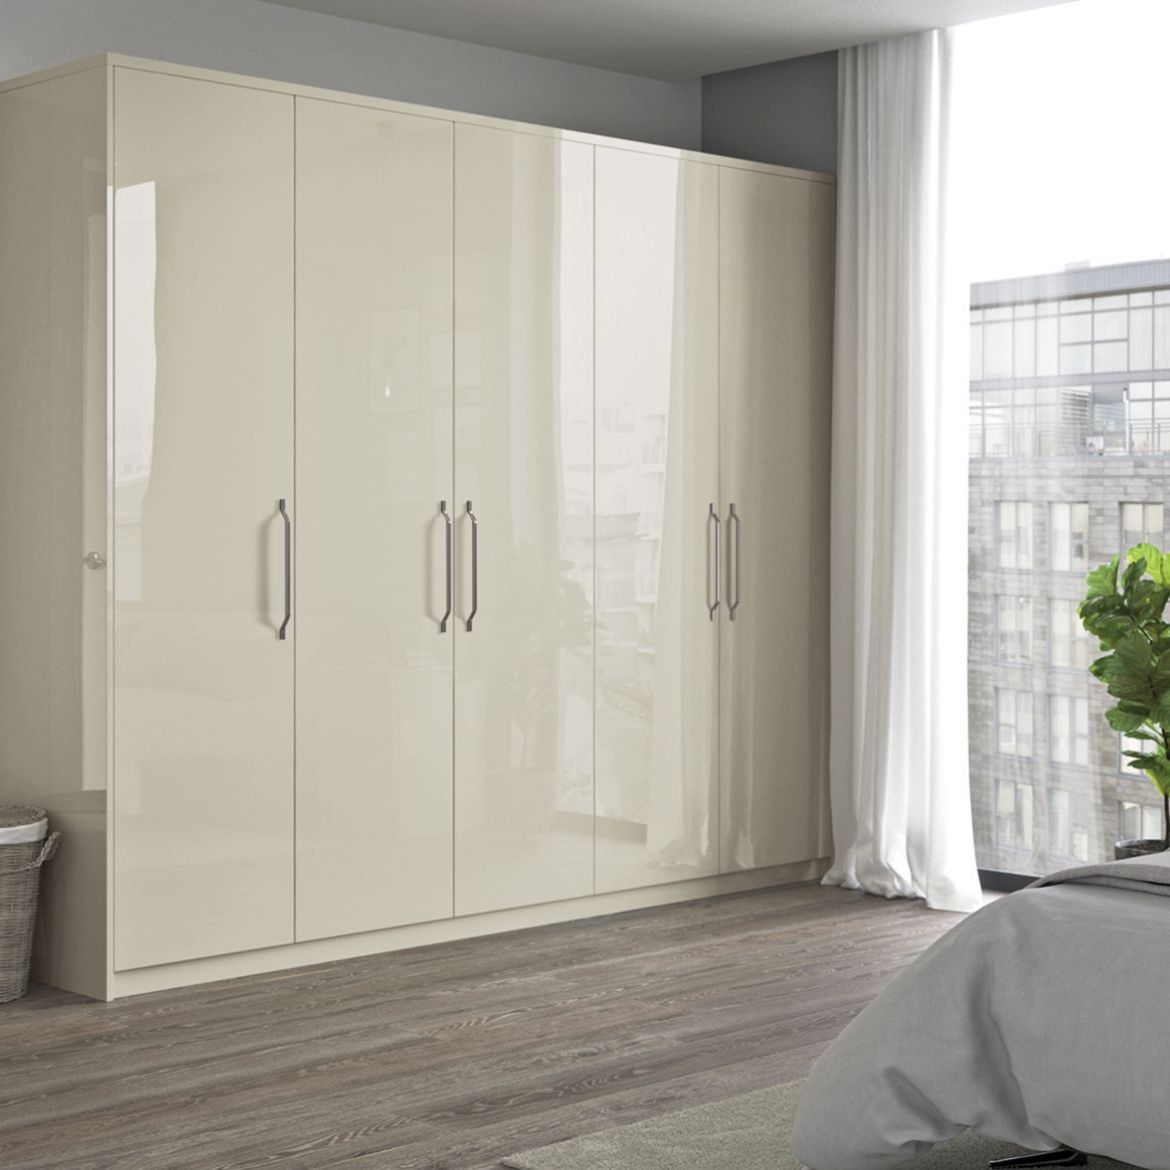 Reflections Wardrobe | Cash & Carry Kitchens Regarding White High Gloss Wardrobes (Gallery 16 of 20)